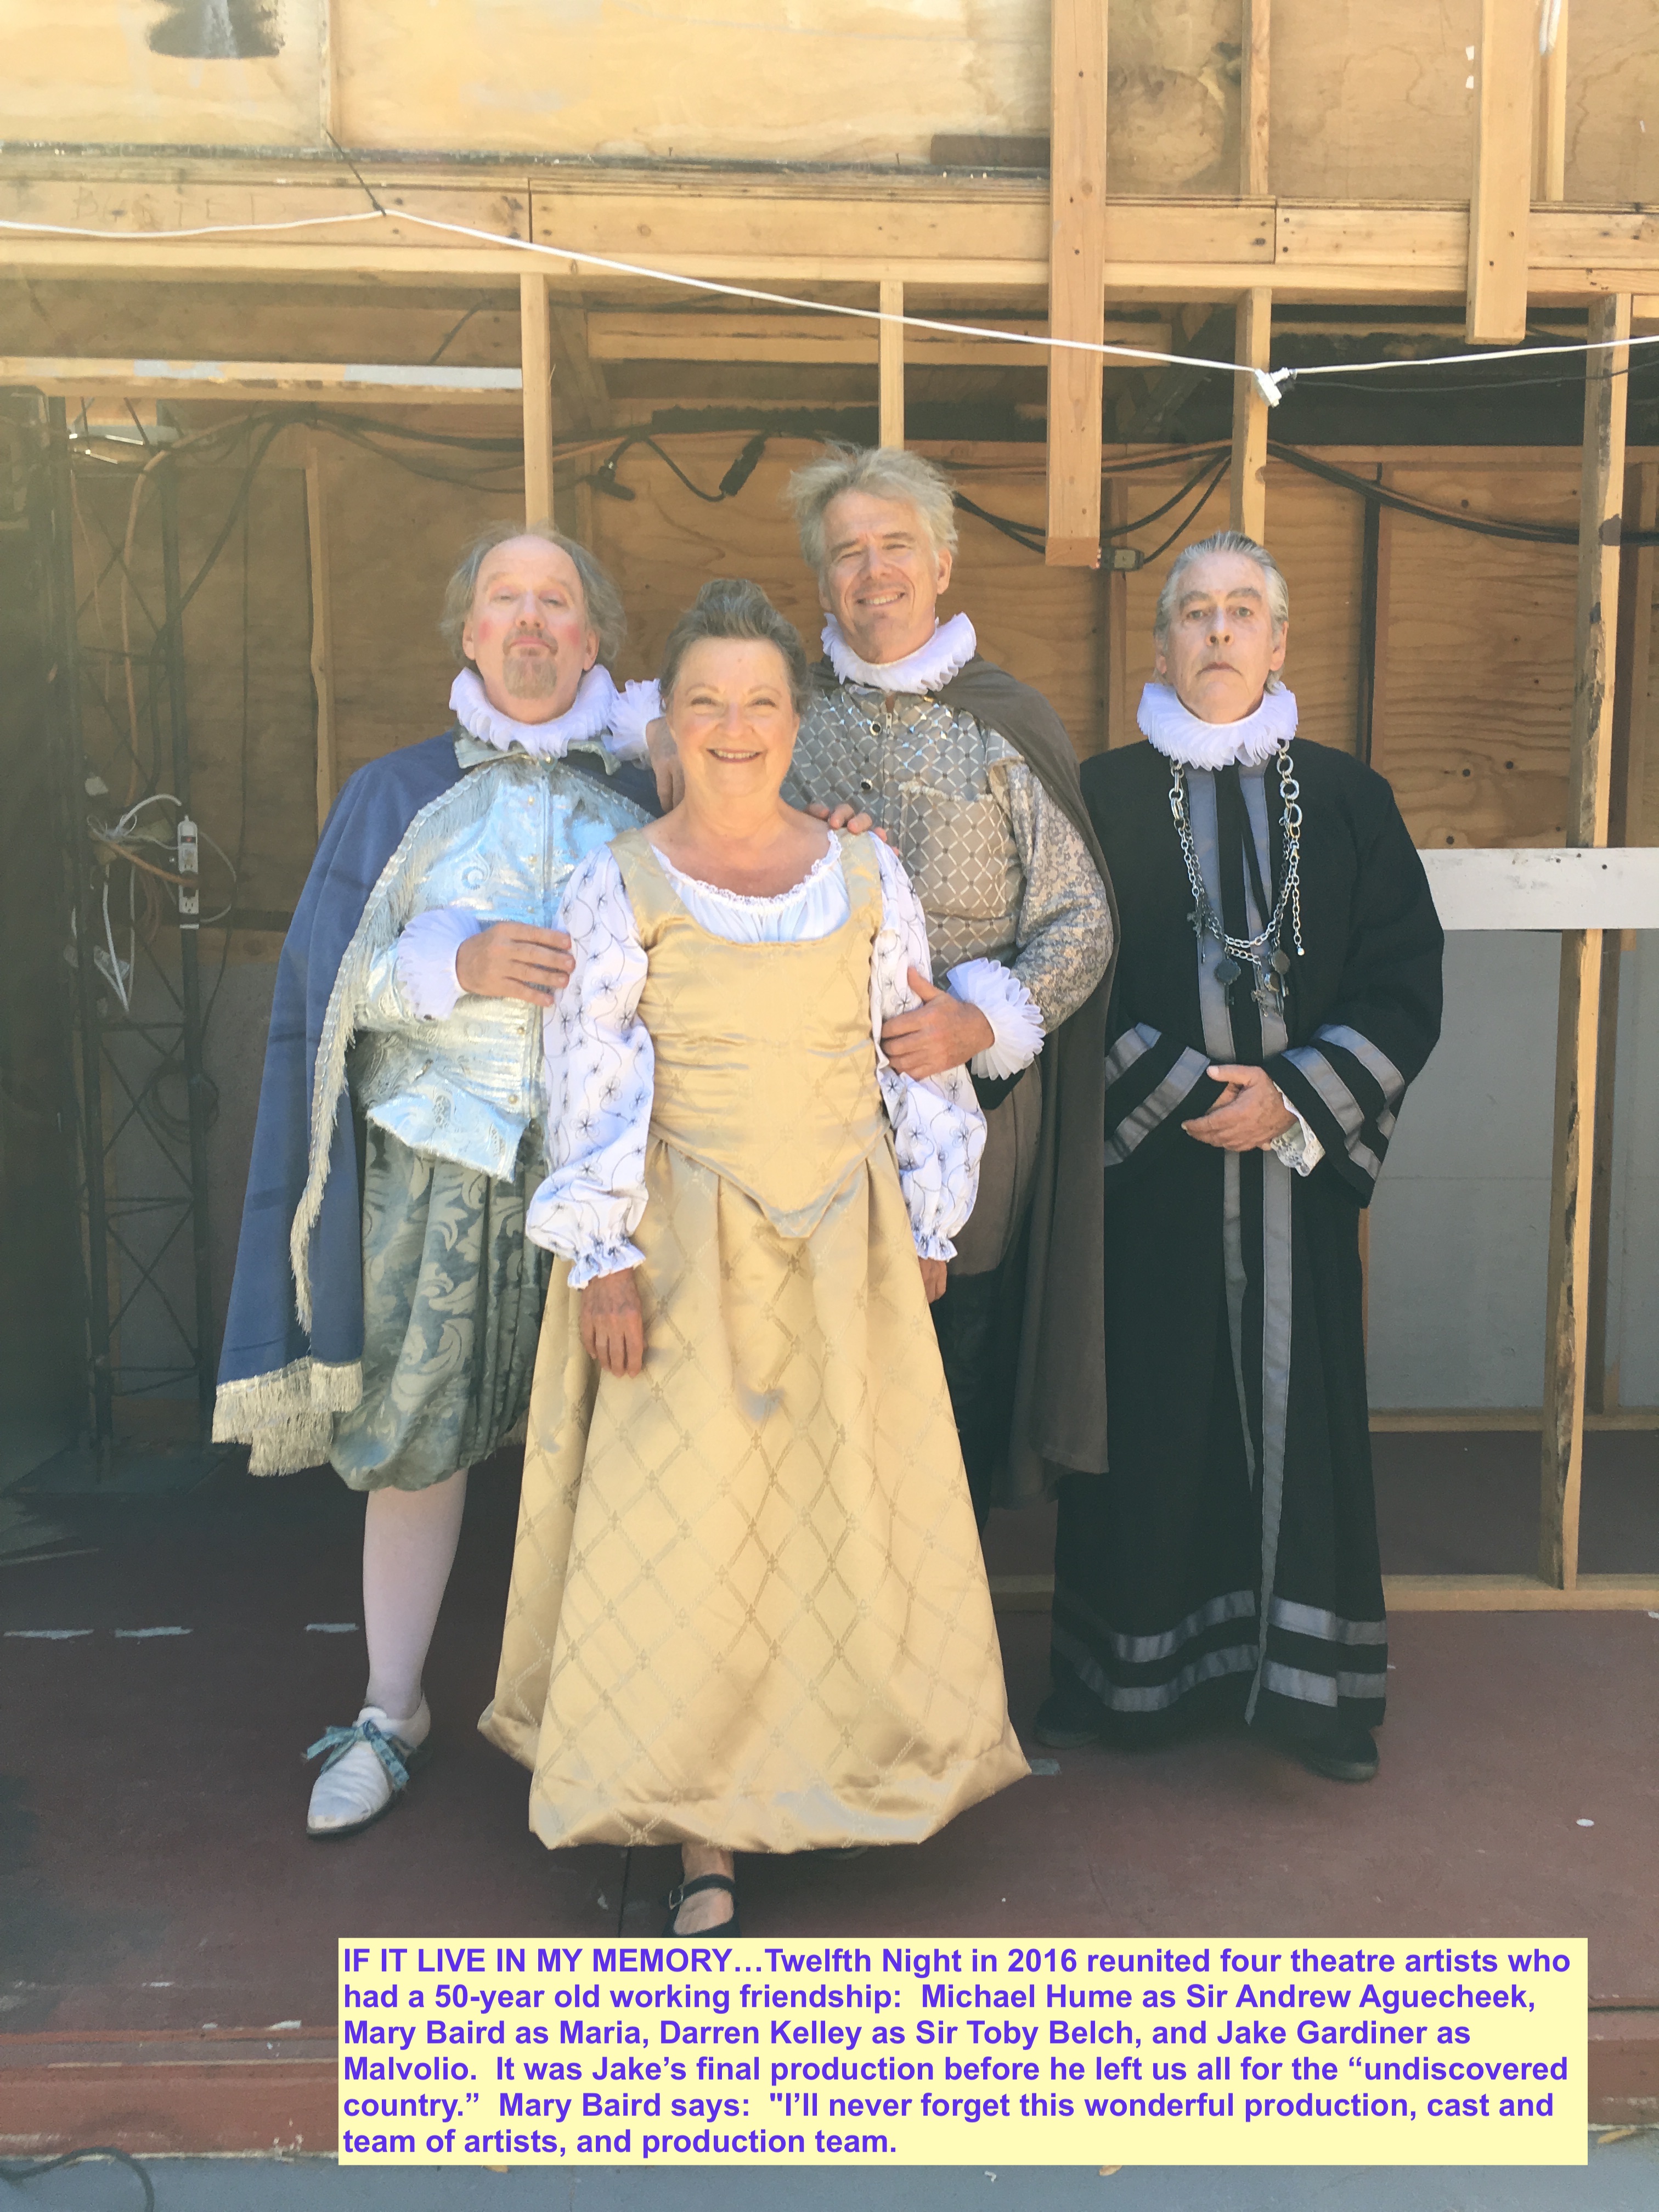 “If It Live in Your Memory” – Your Memories of Marin Shakespeare Company’s first 30 Years